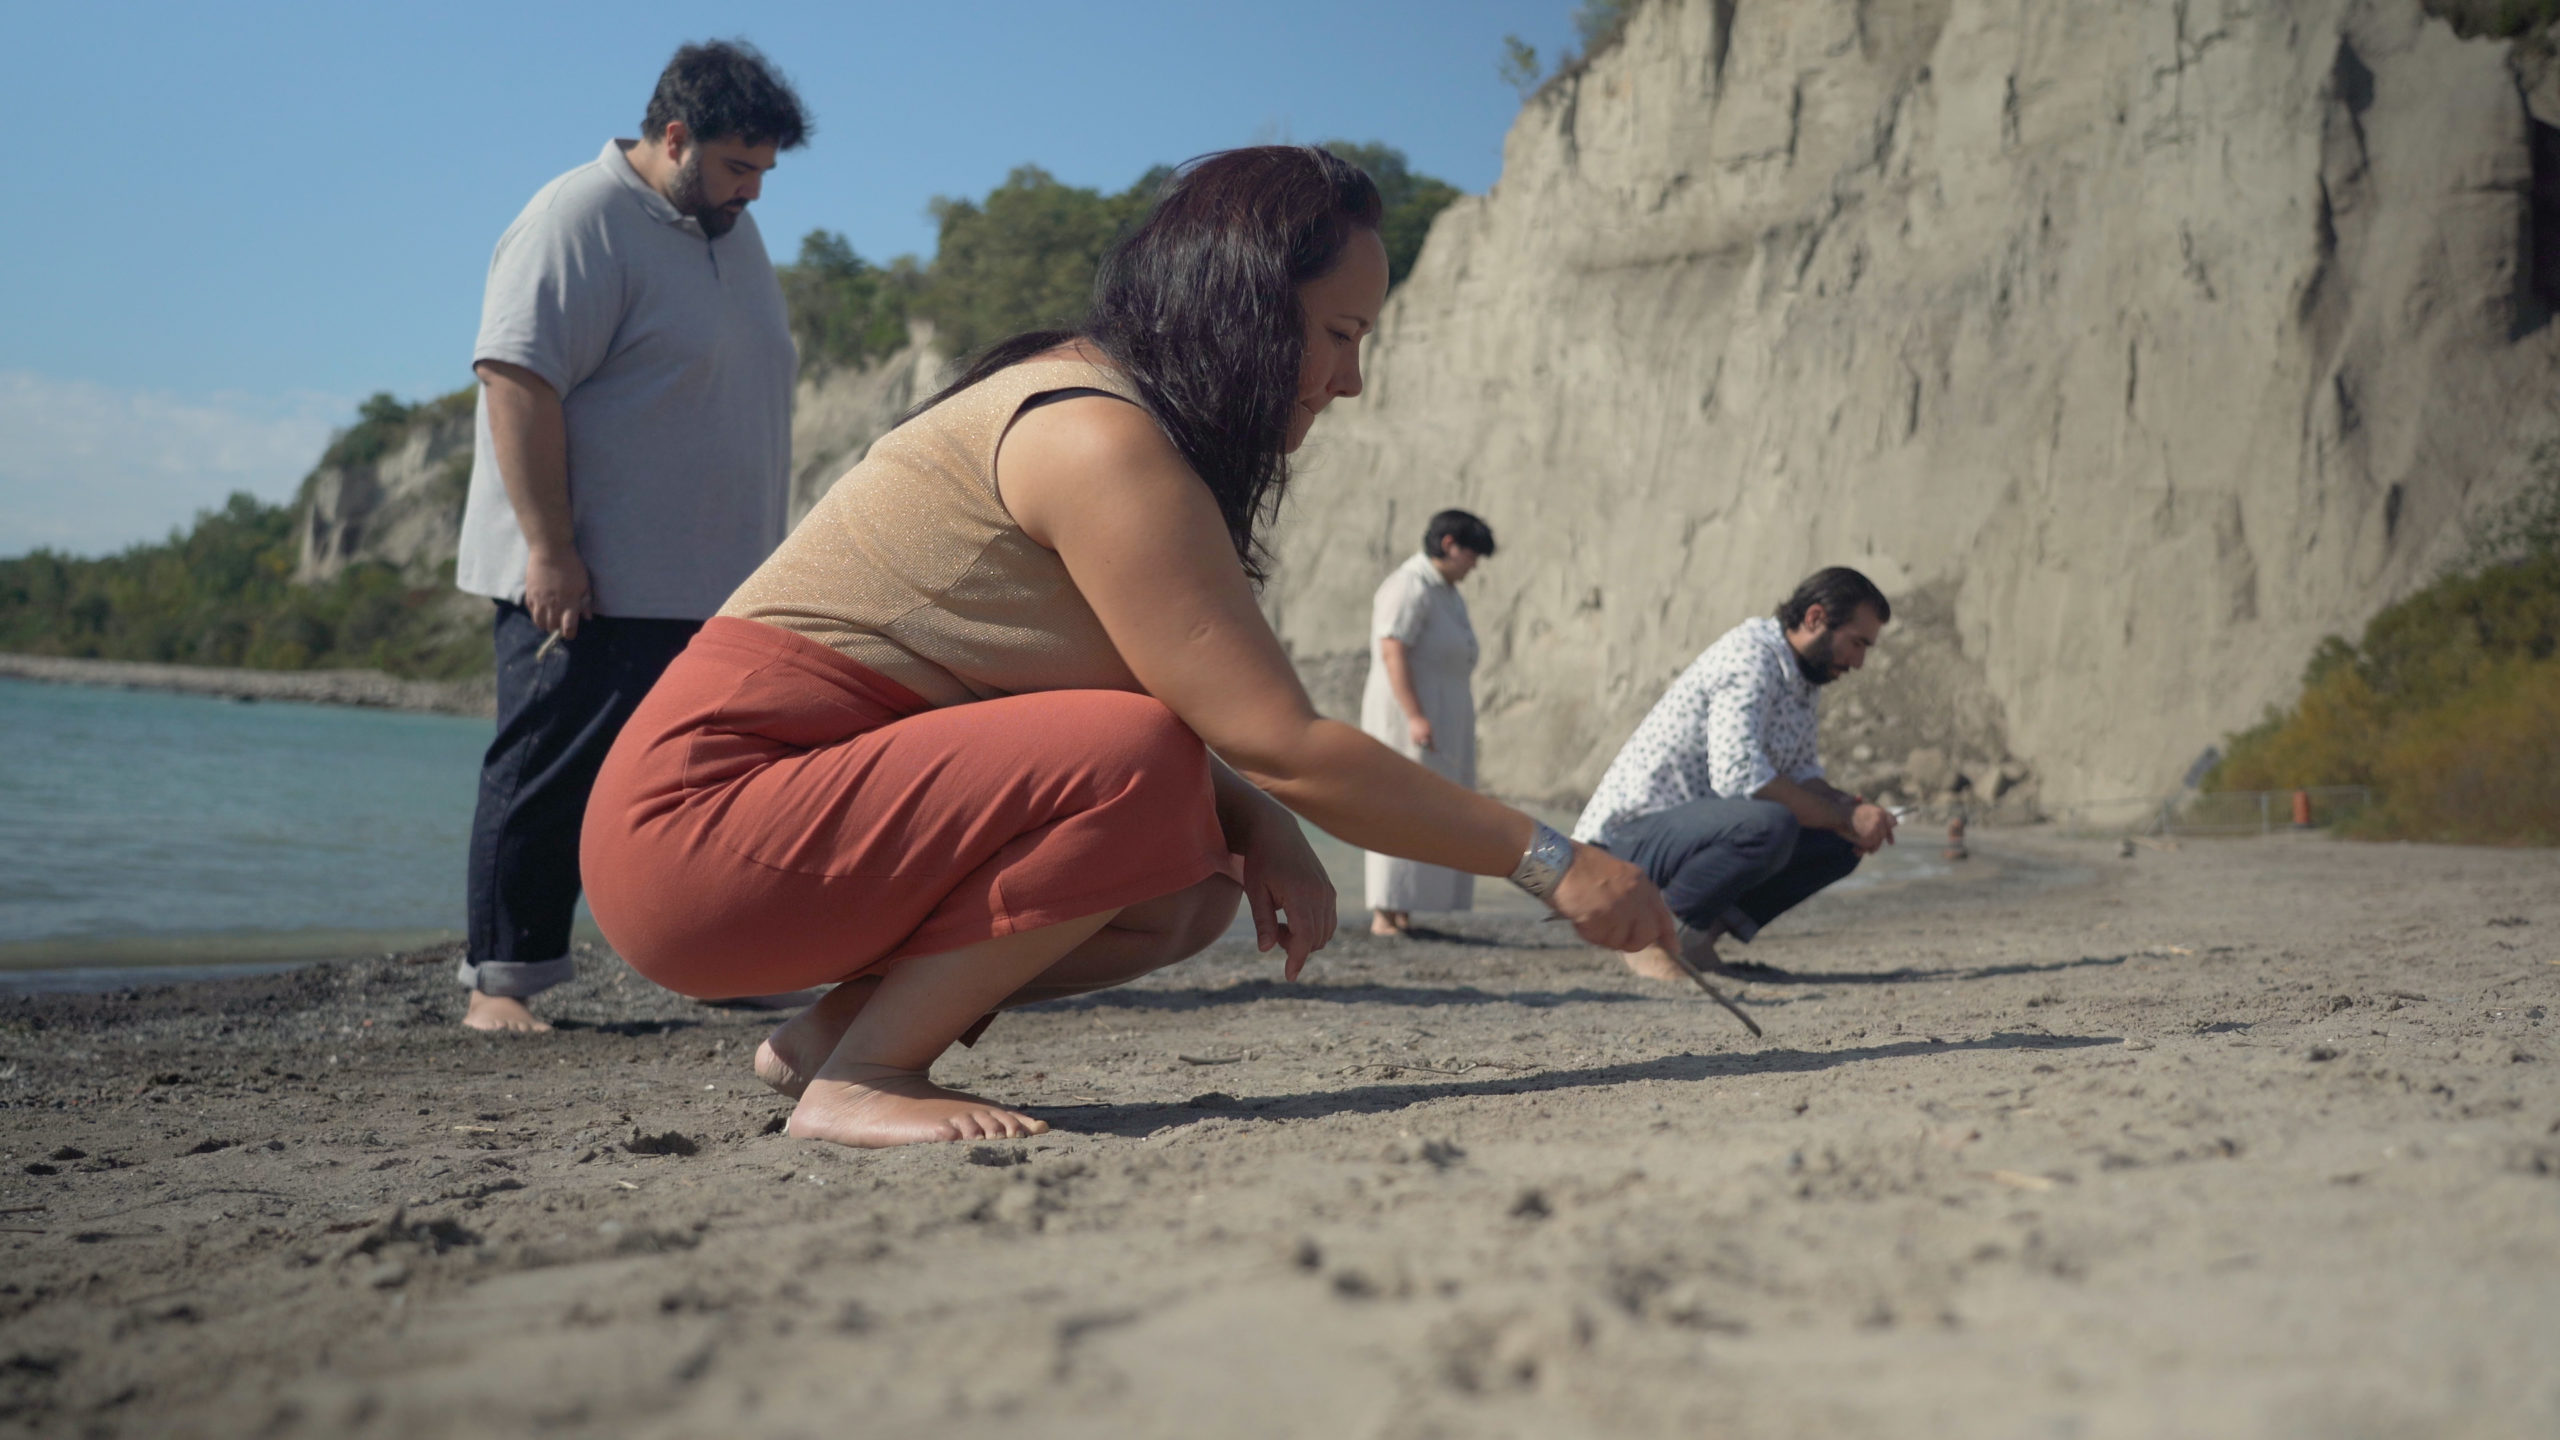 This image features the four requiem solists, Marion, Andrew, Midori, and Vartan writing in the sand.